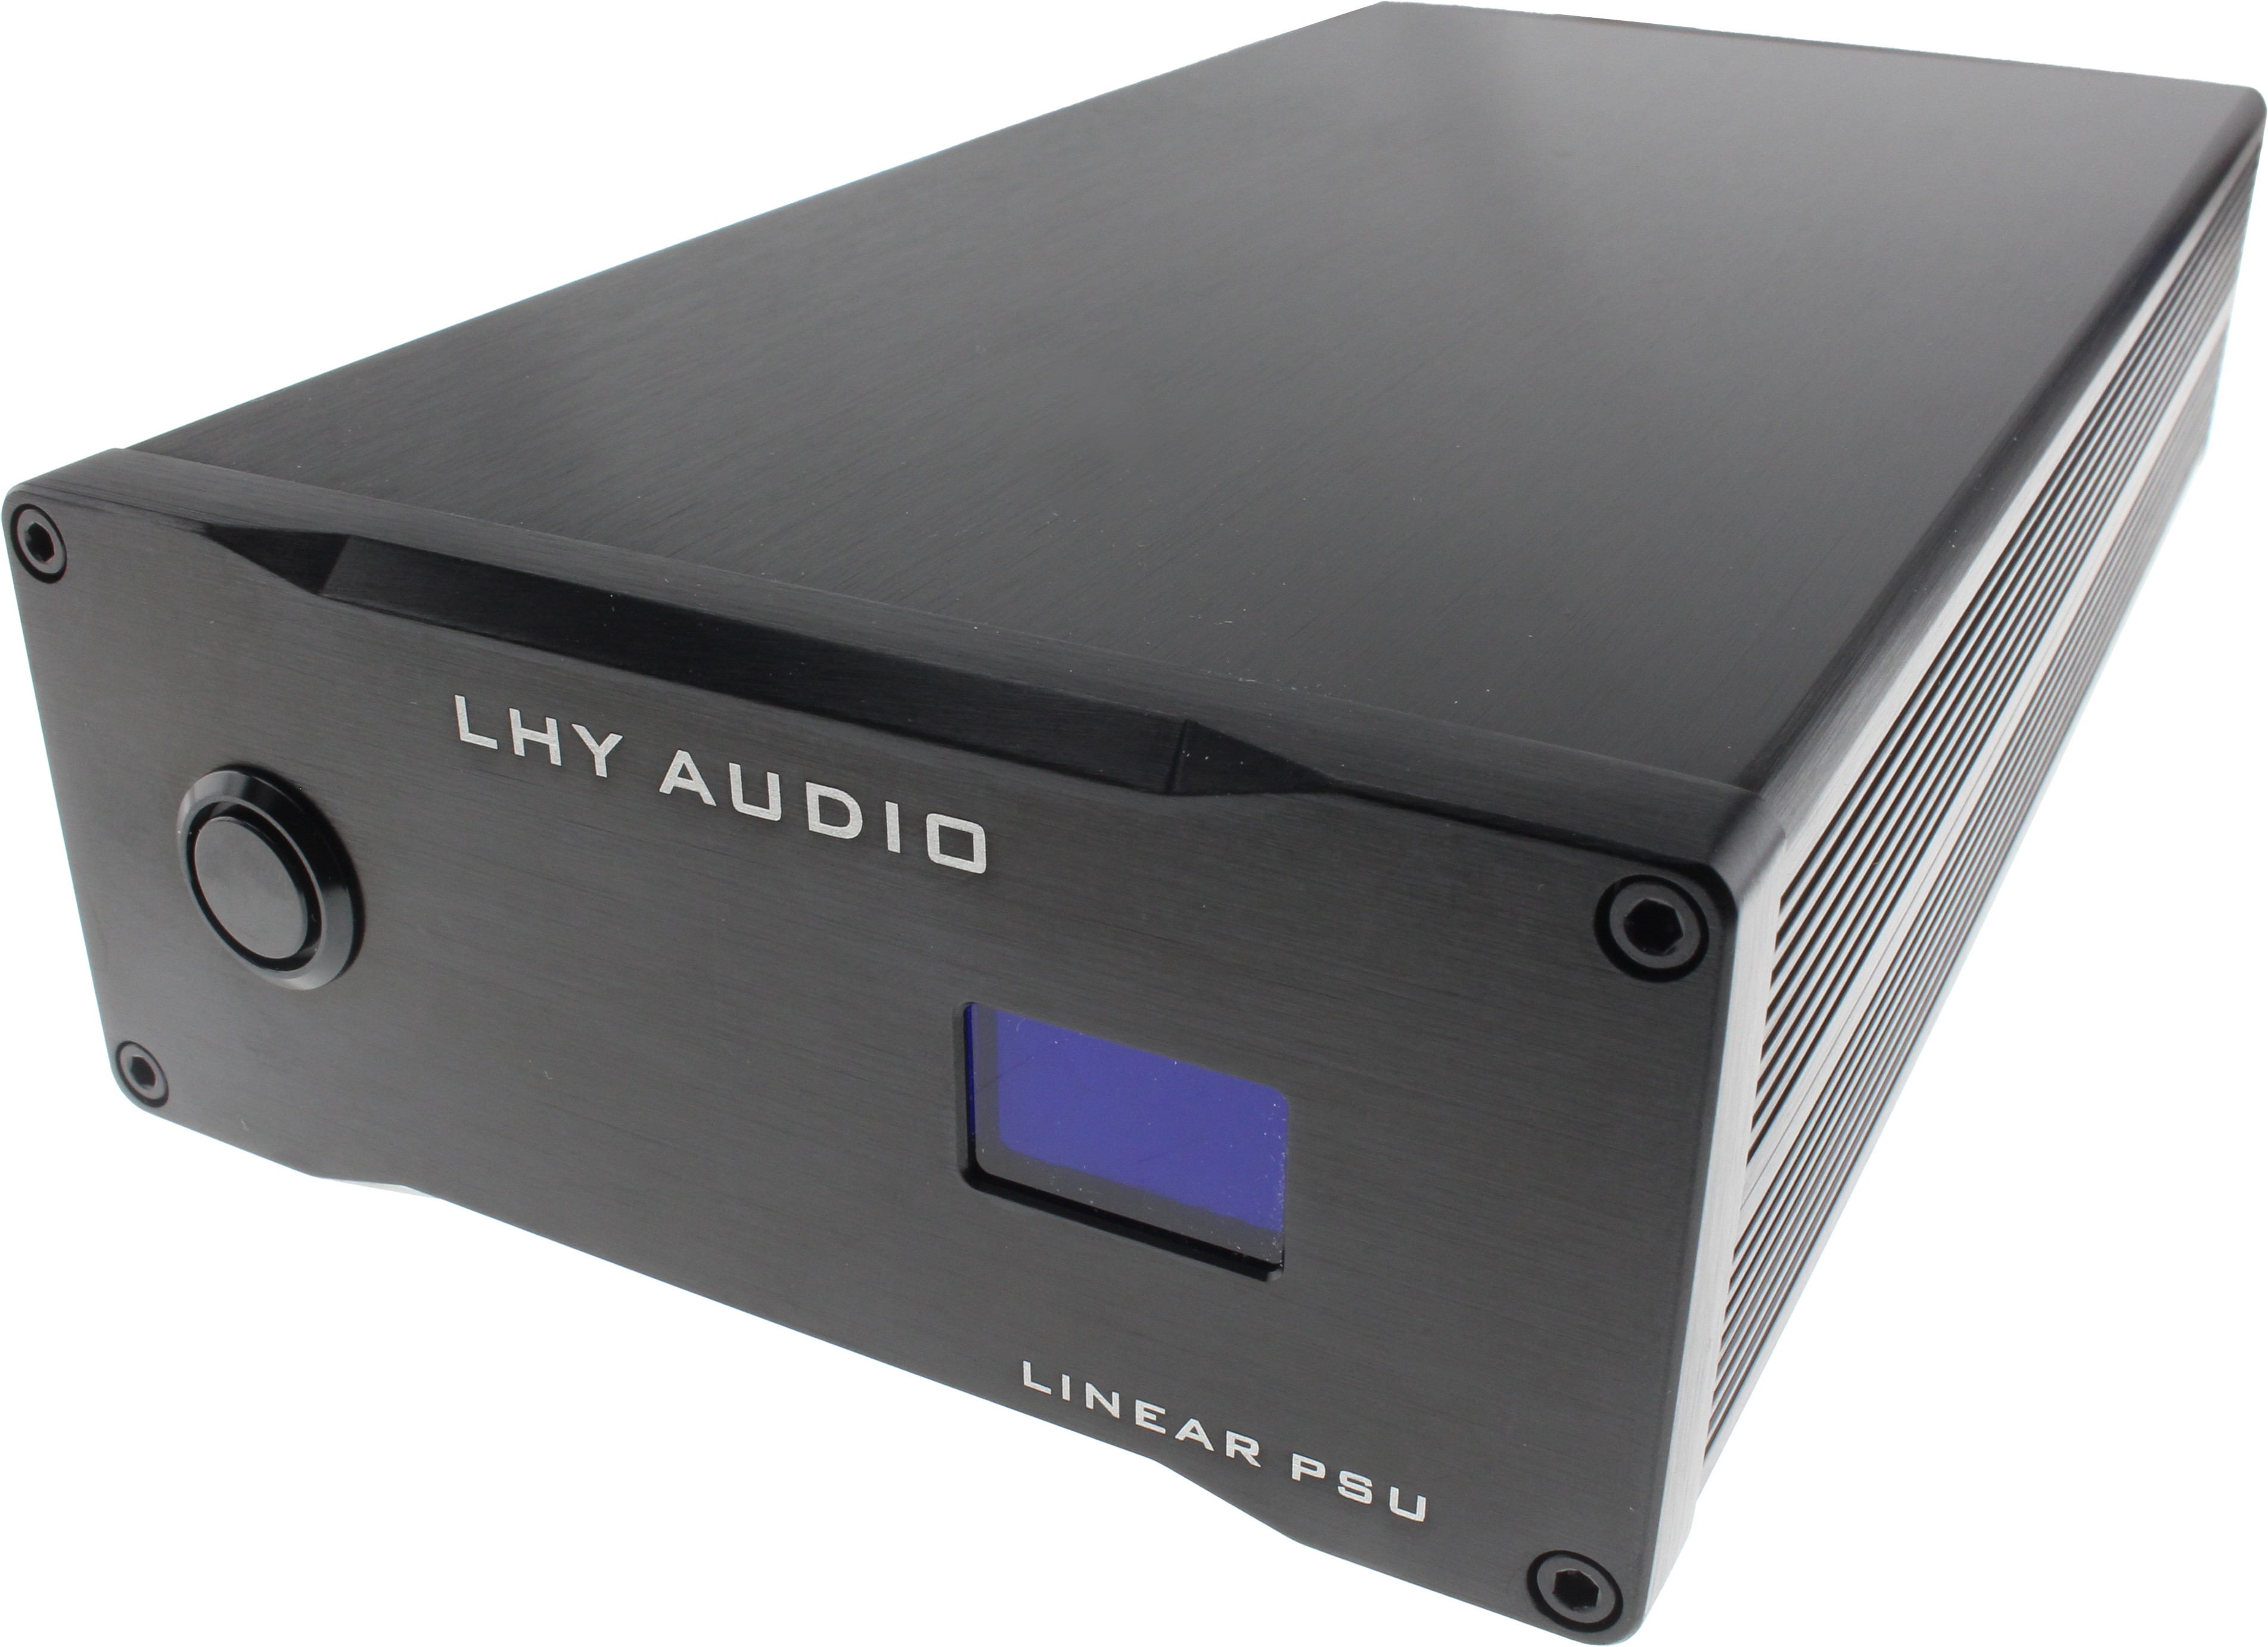 LHY AUDIO LPS80VA PREMIUM Linear Regulated Low Noise Power Supply 230V to 12V 5A 80VA